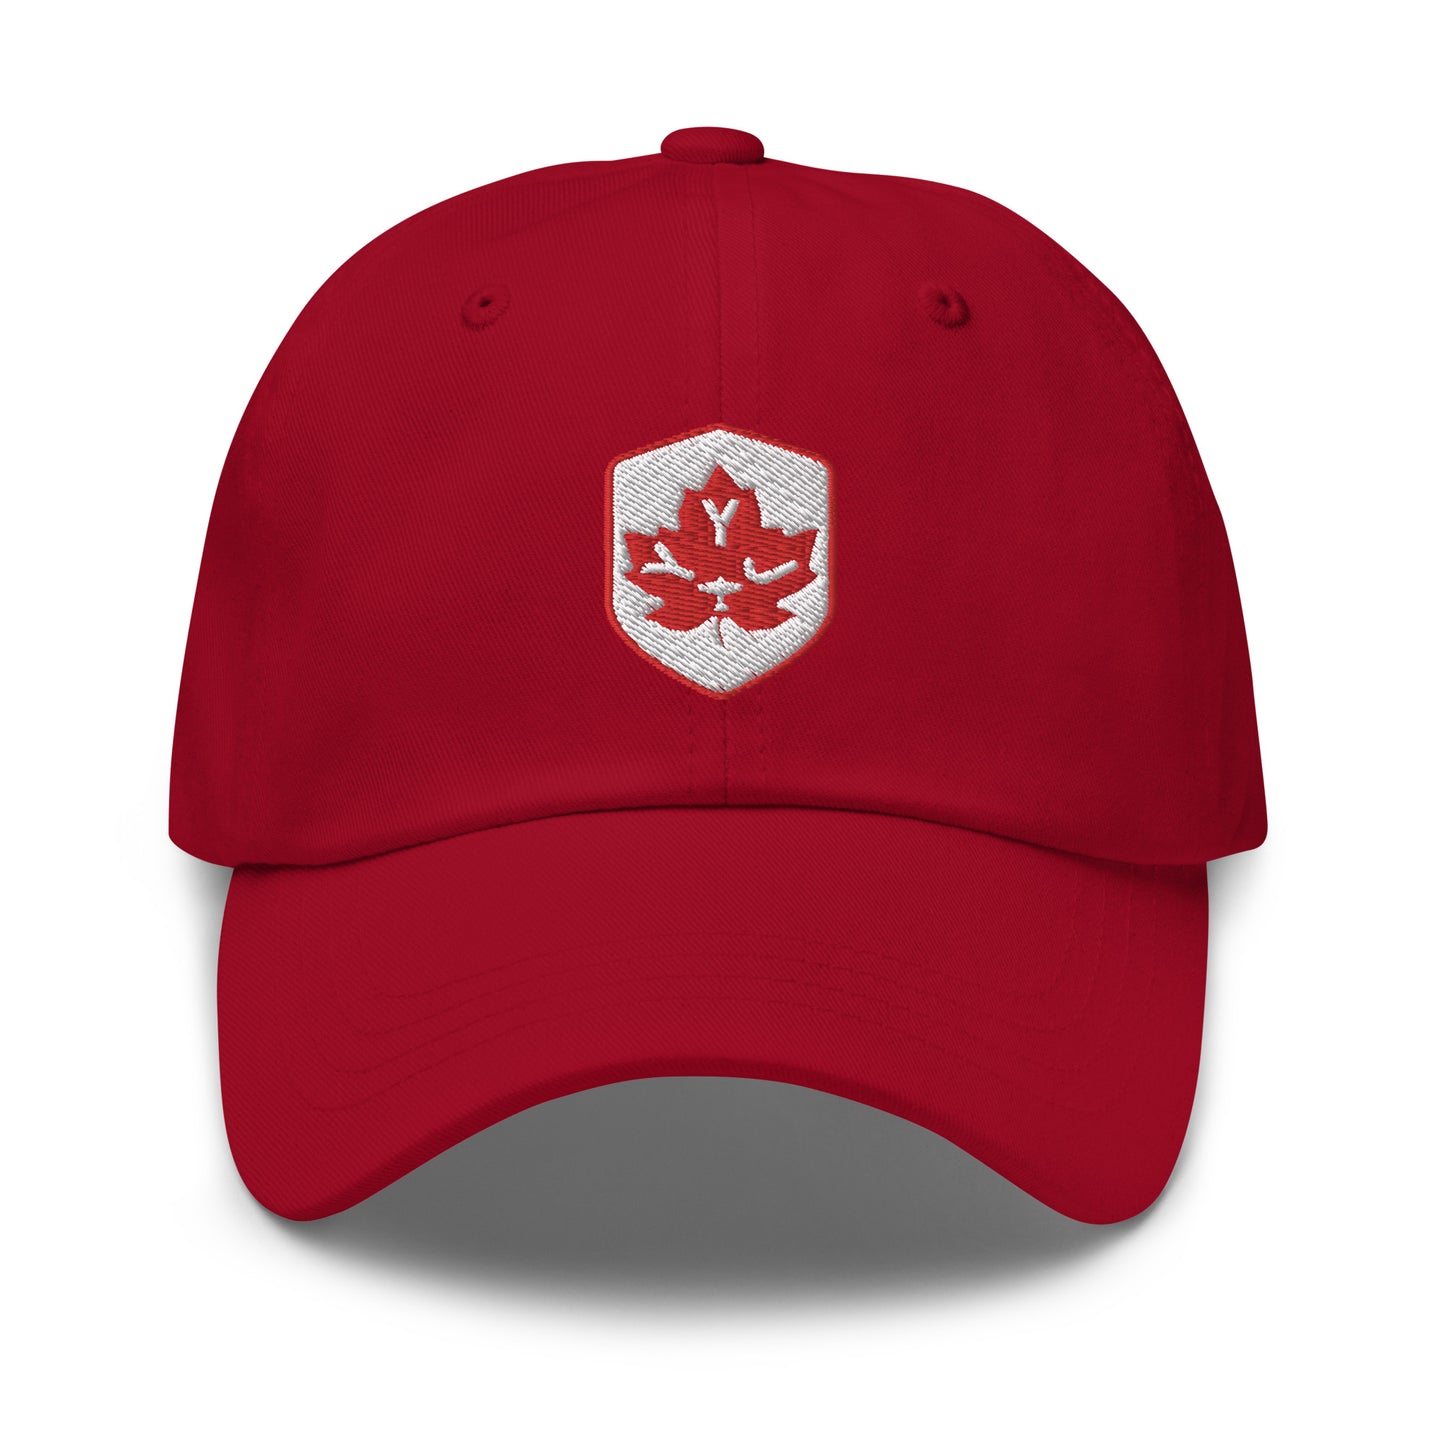 Maple Leaf Baseball Cap - Red/White • YYJ Victoria • YHM Designs - Image 15